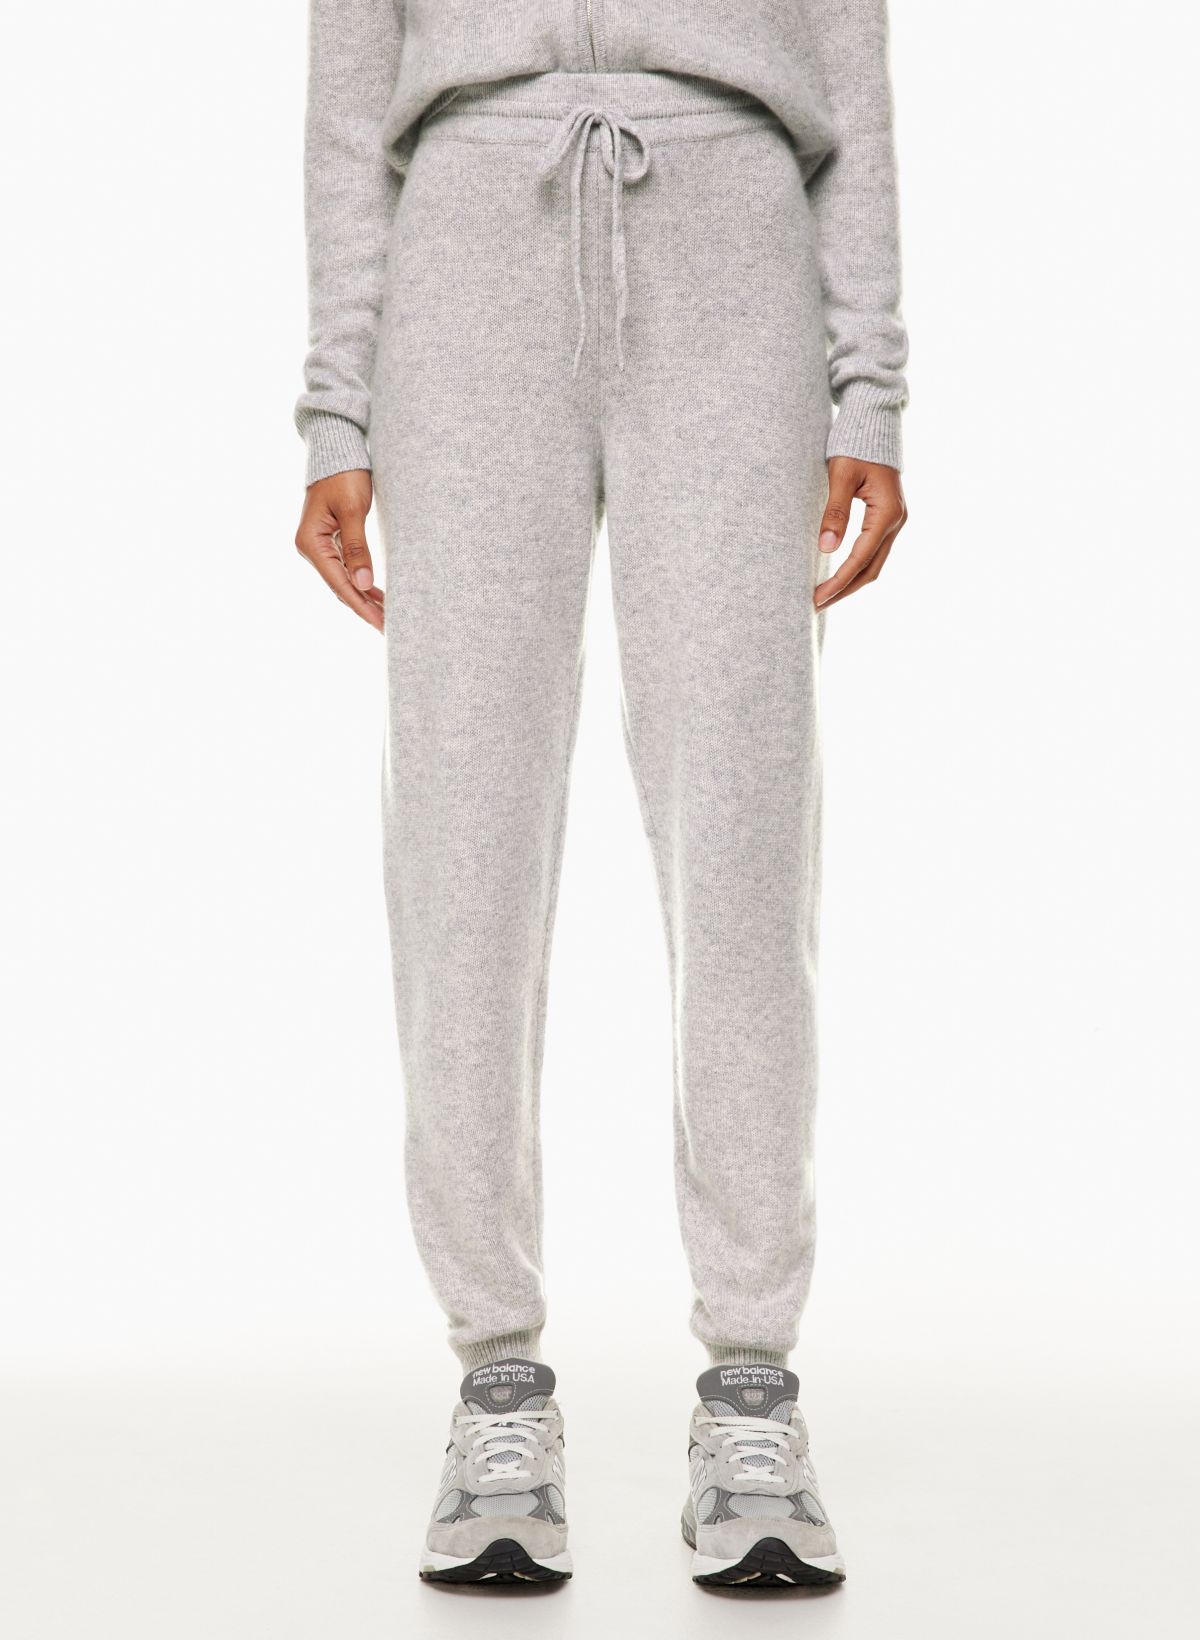 C by Bloomingdale's Cashmere Jogger Pants - 100% Exclusive